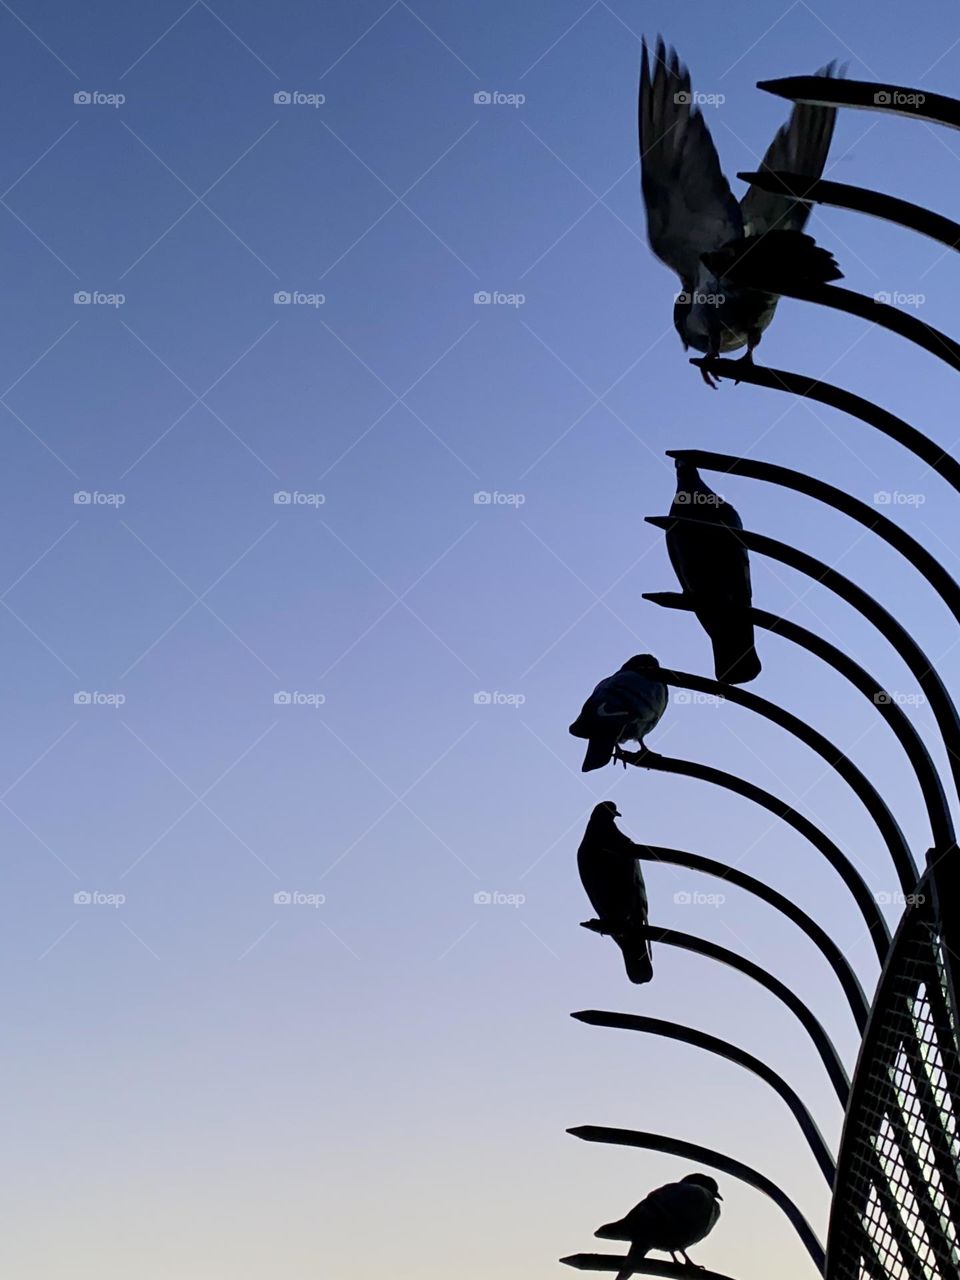 Pigeons are resting on a metal bars